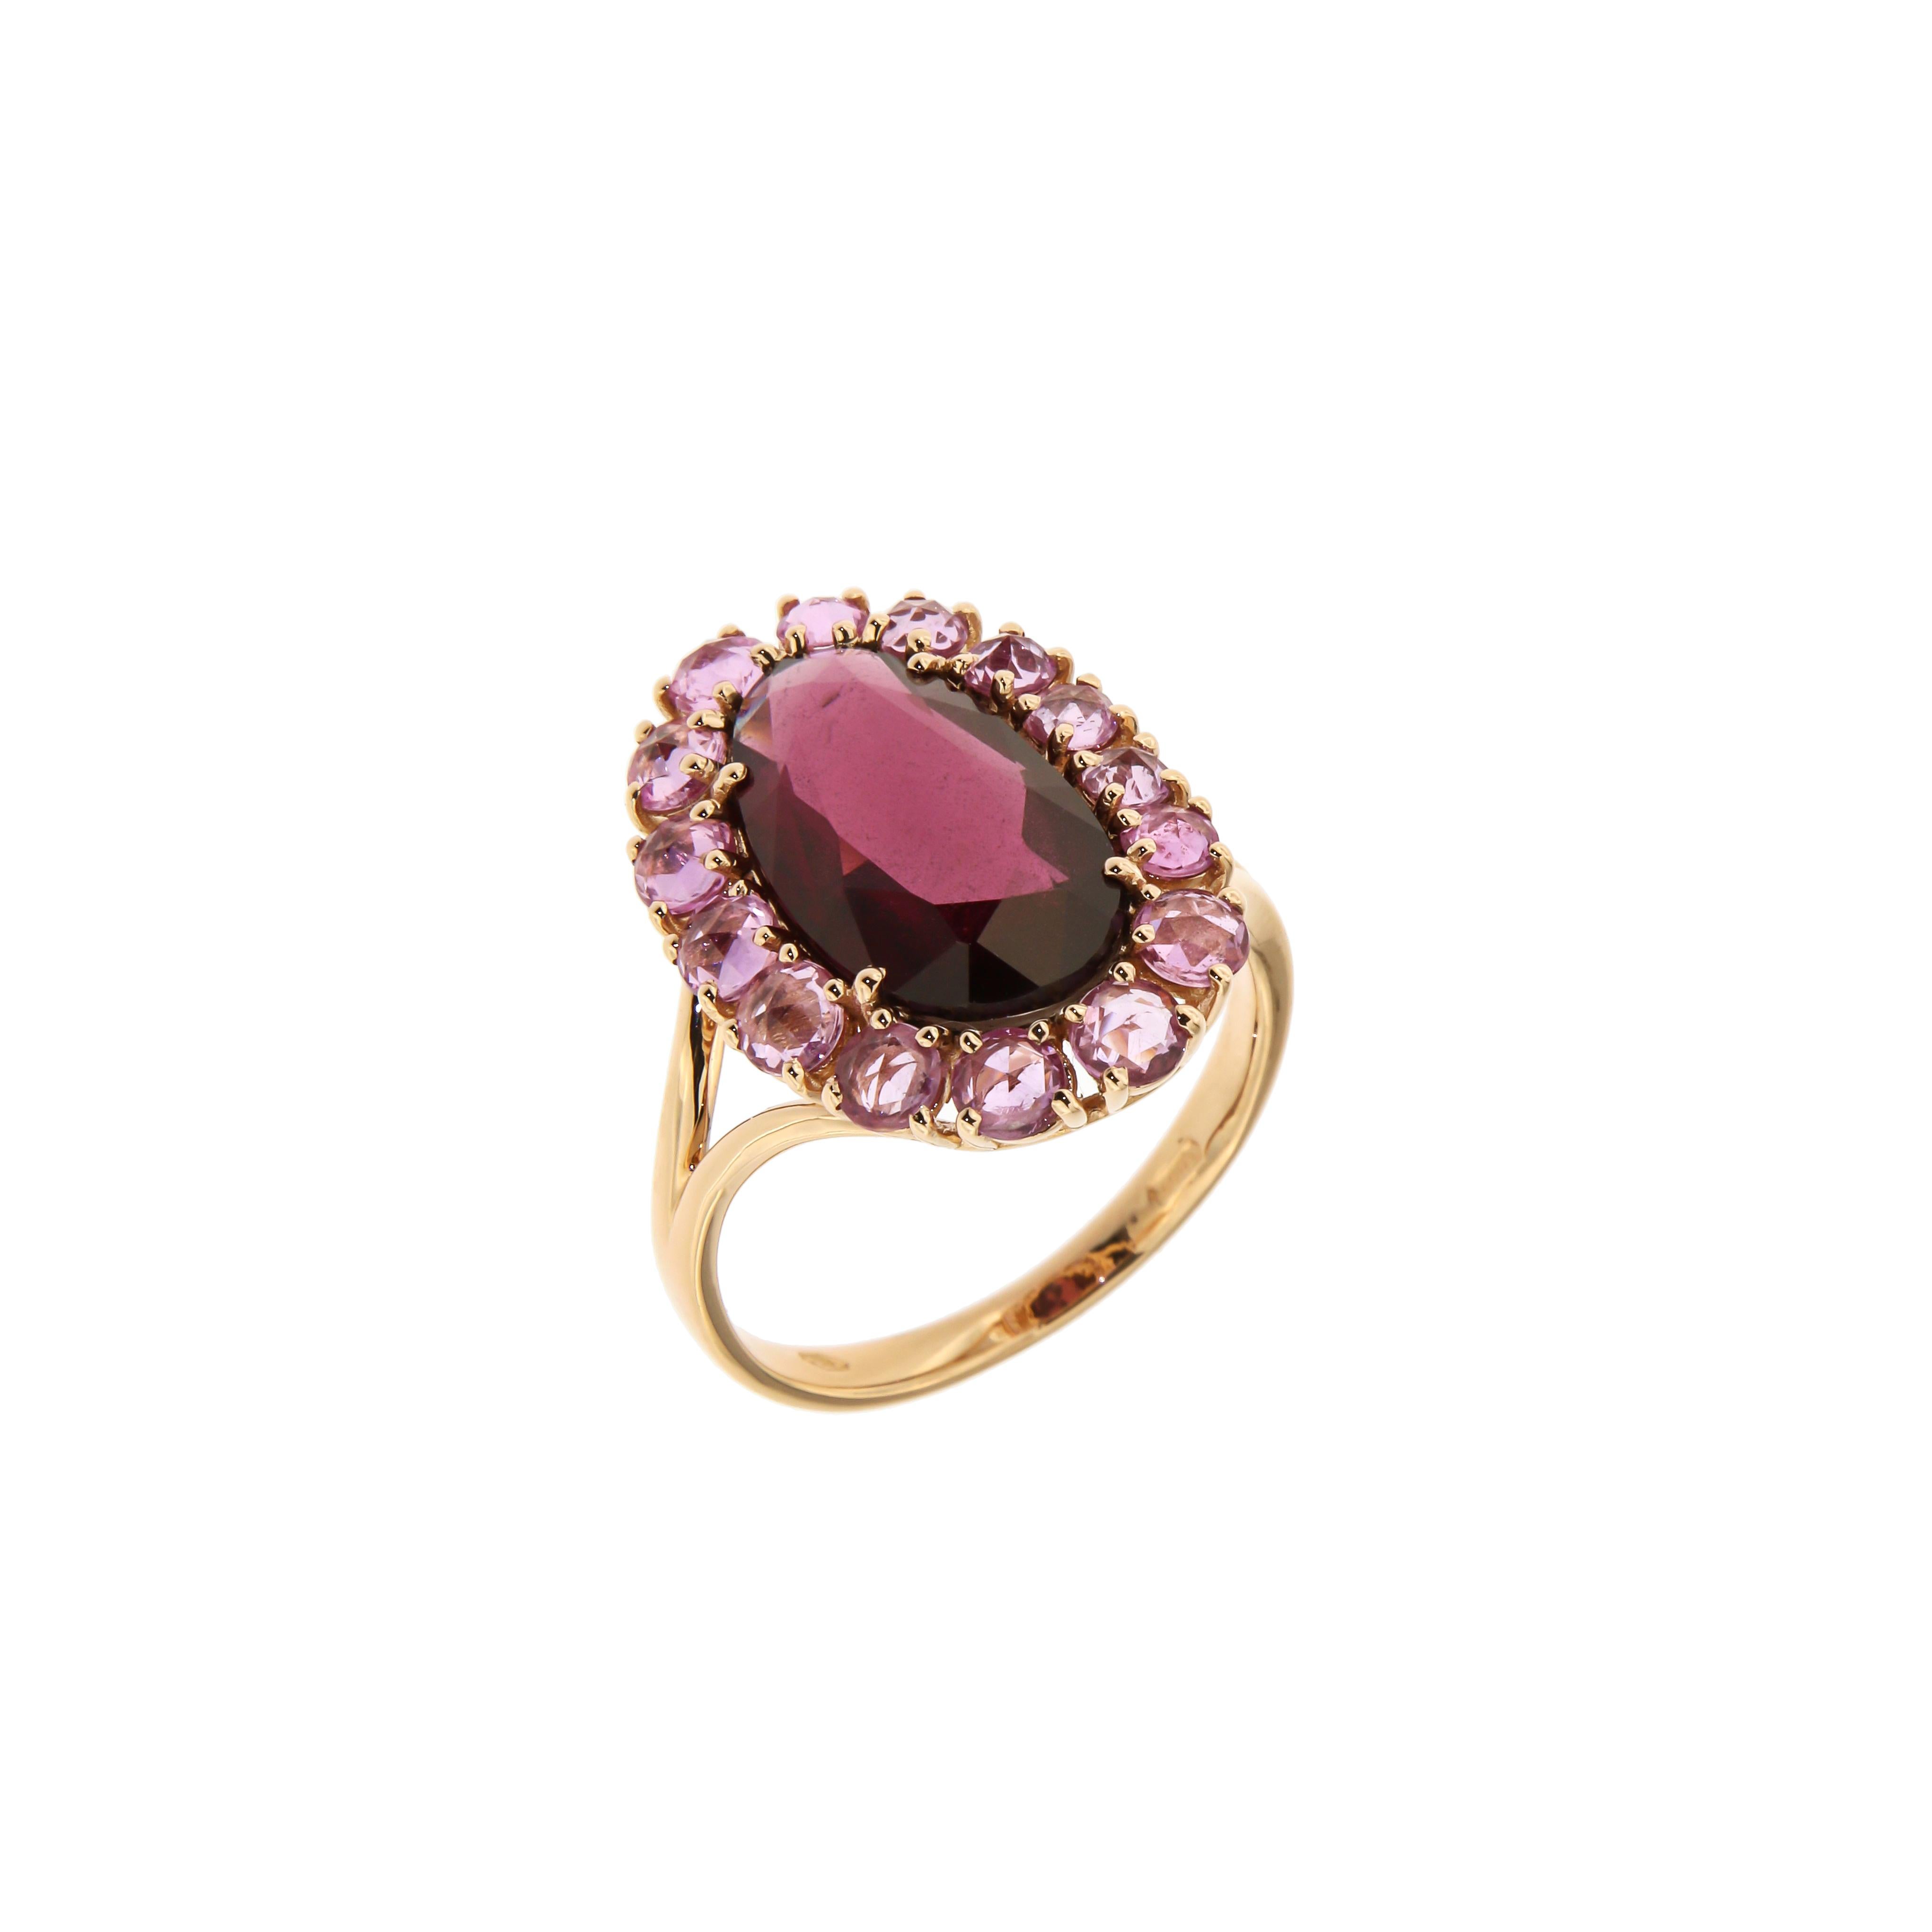 Antique Cushion Cut Italian Modern 18k Rhodolite Pink Sapphire Rose Gold Ring for Her For Sale